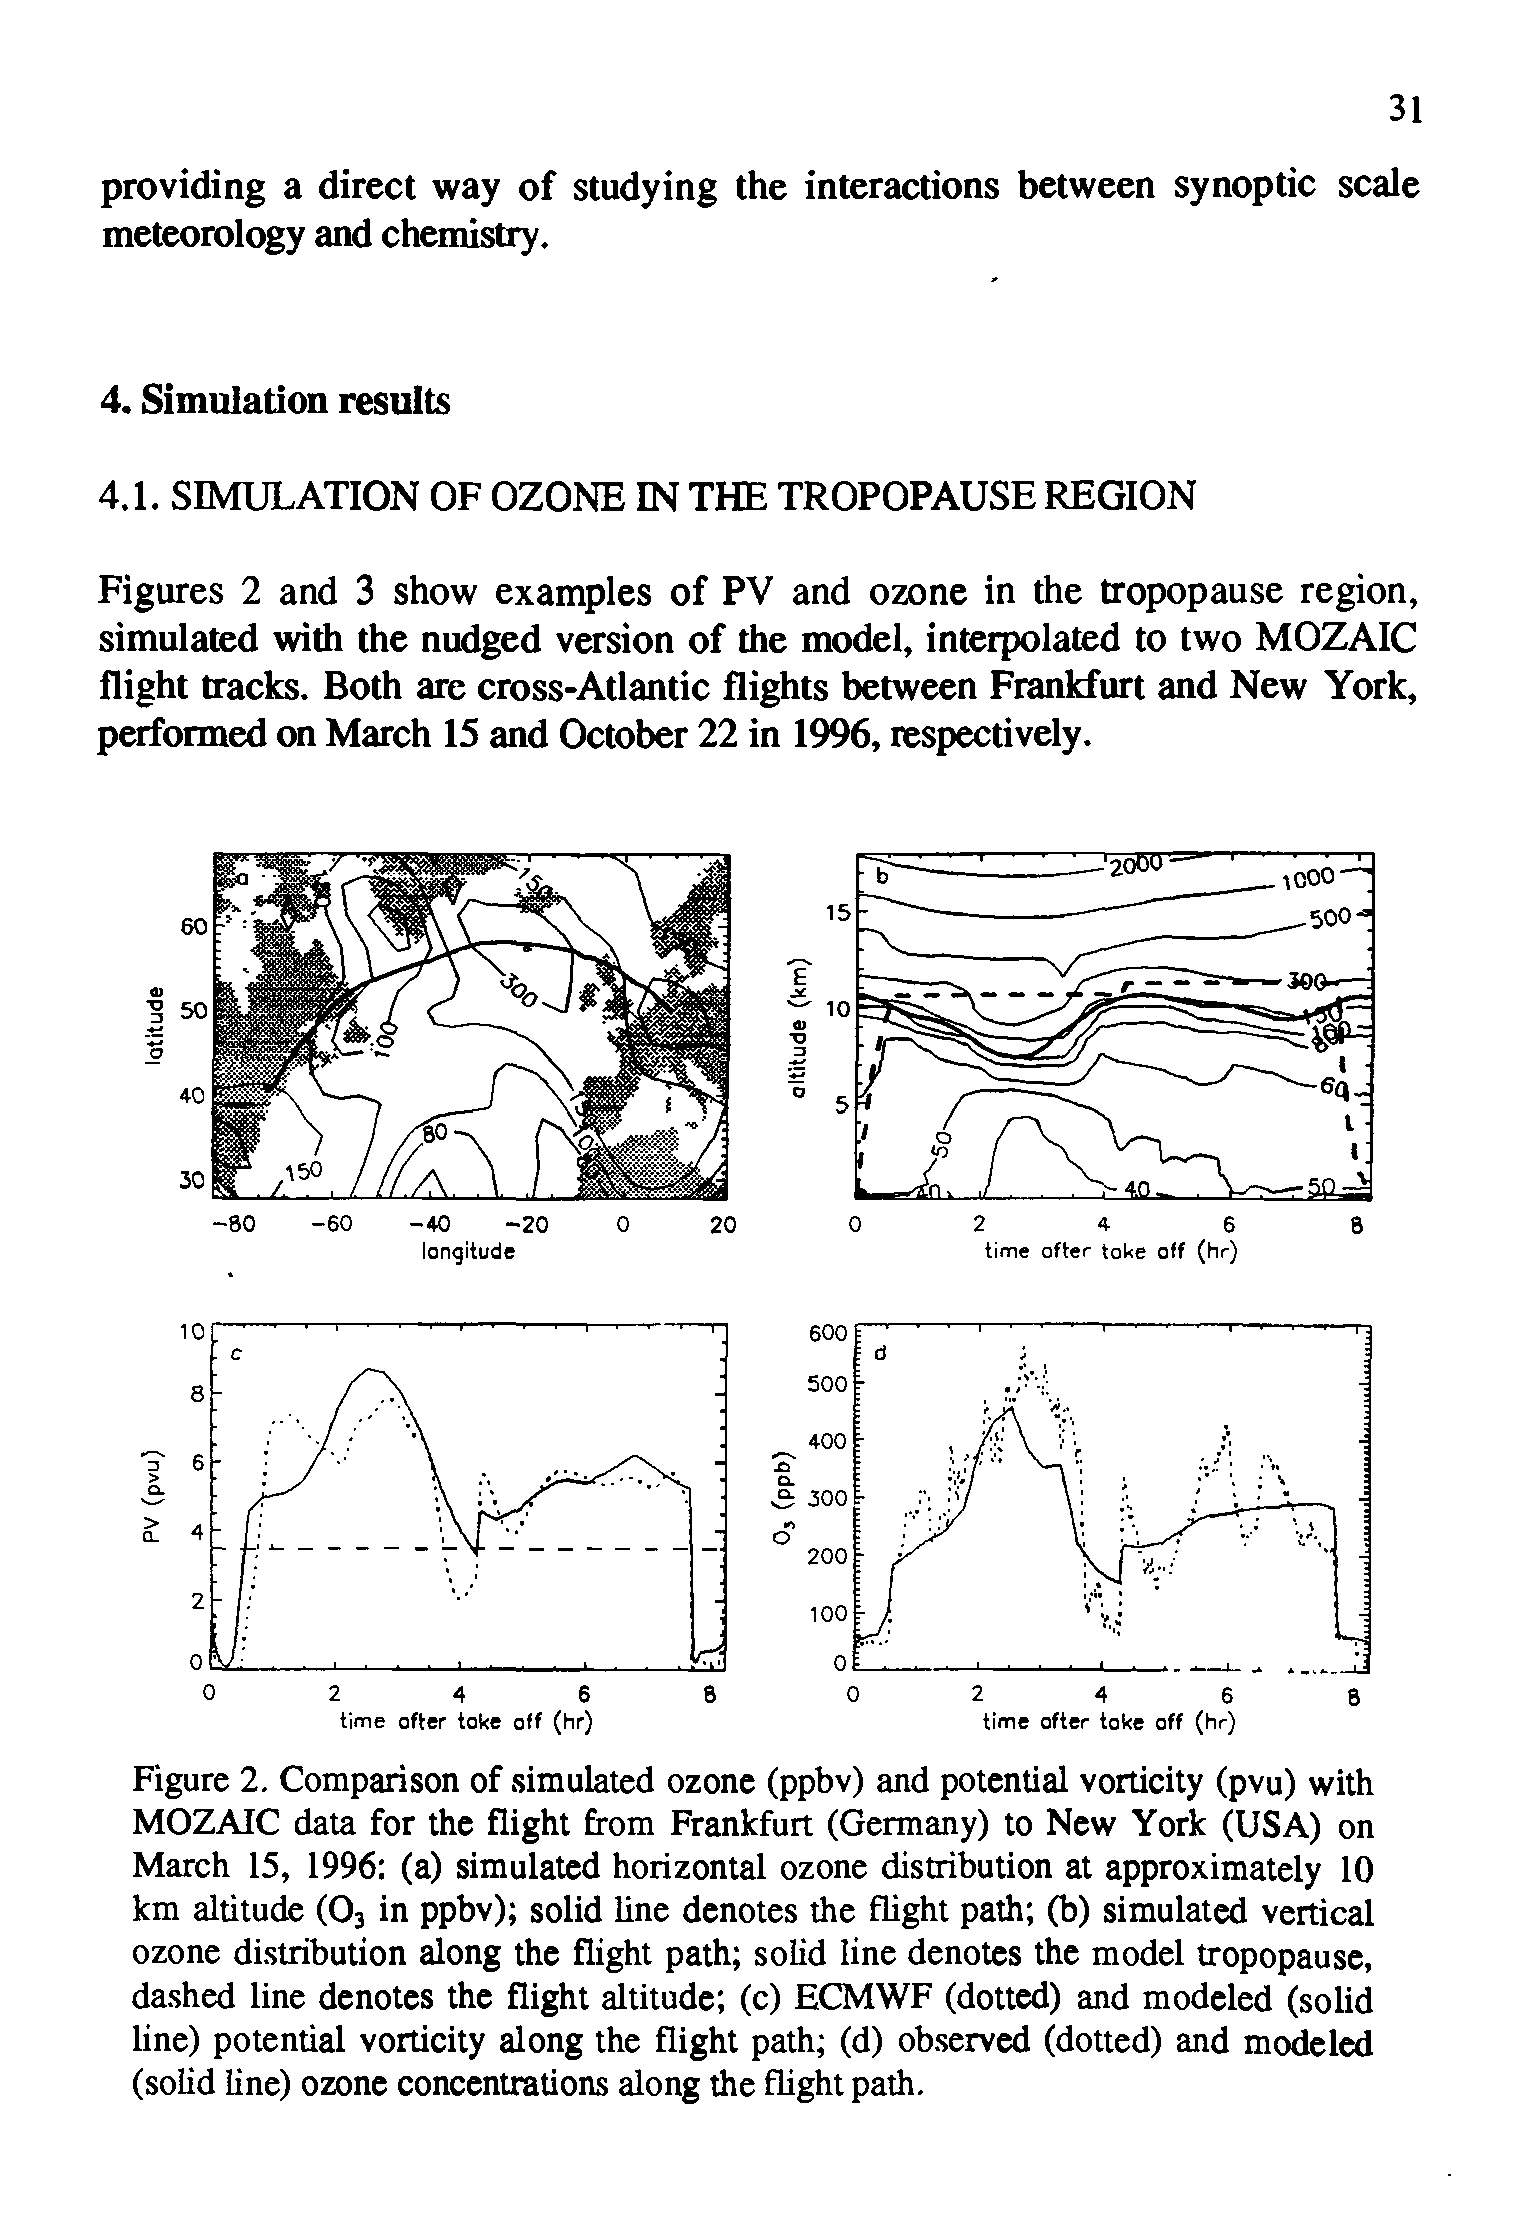 Figure 2. Comparison of simulated ozone (ppbv) and potential vorticity (pvu) with MOZAIC data for the flight from Frankfurt (Germany) to New York (USA) on March 15, 1996 (a) simulated horizontal ozone distribution at approximately 10 km altitude (03 in ppbv) solid line denotes the flight path (b) simulated vertical ozone distribution along the flight path solid line denotes the model tropopause, dashed line denotes the flight altitude (c) ECMWF (dotted) and modeled (solid line) potential vorticity along the flight path (d) observed (dotted) and modeled (solid line) ozone concentrations along the flight path.